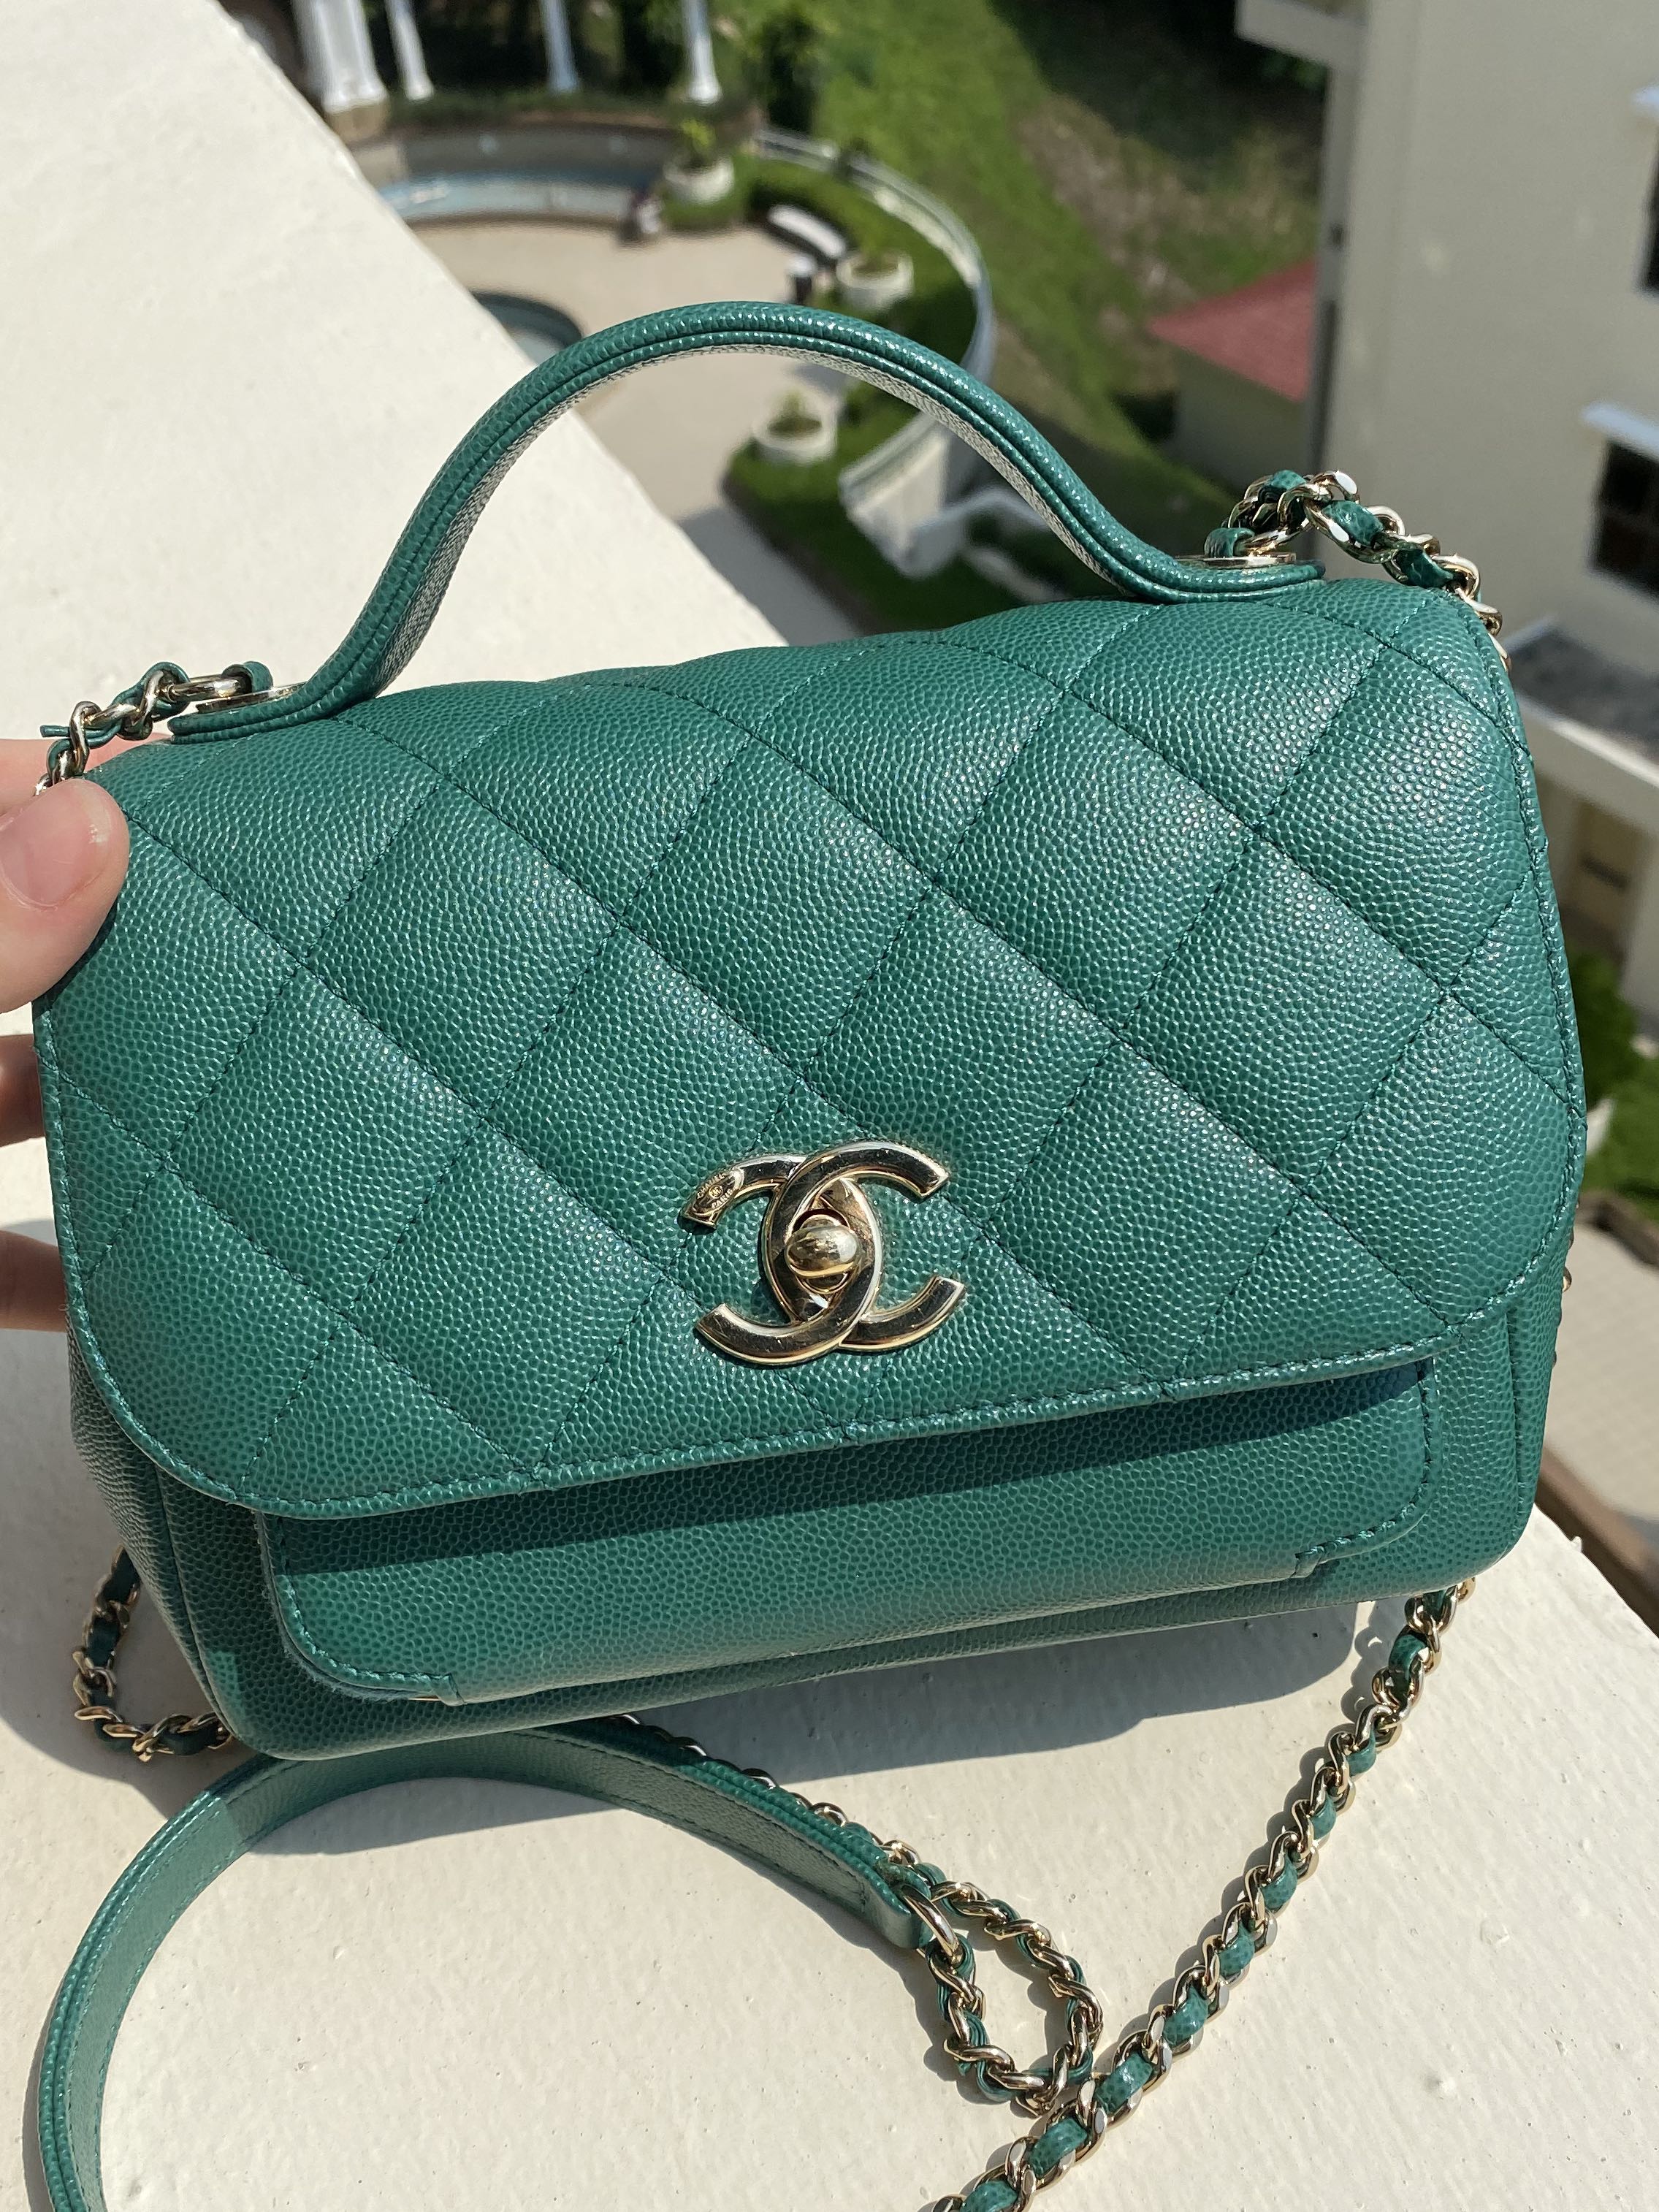 Chanel Business Affinity Large Flap Bag in Emerald Green Caviar